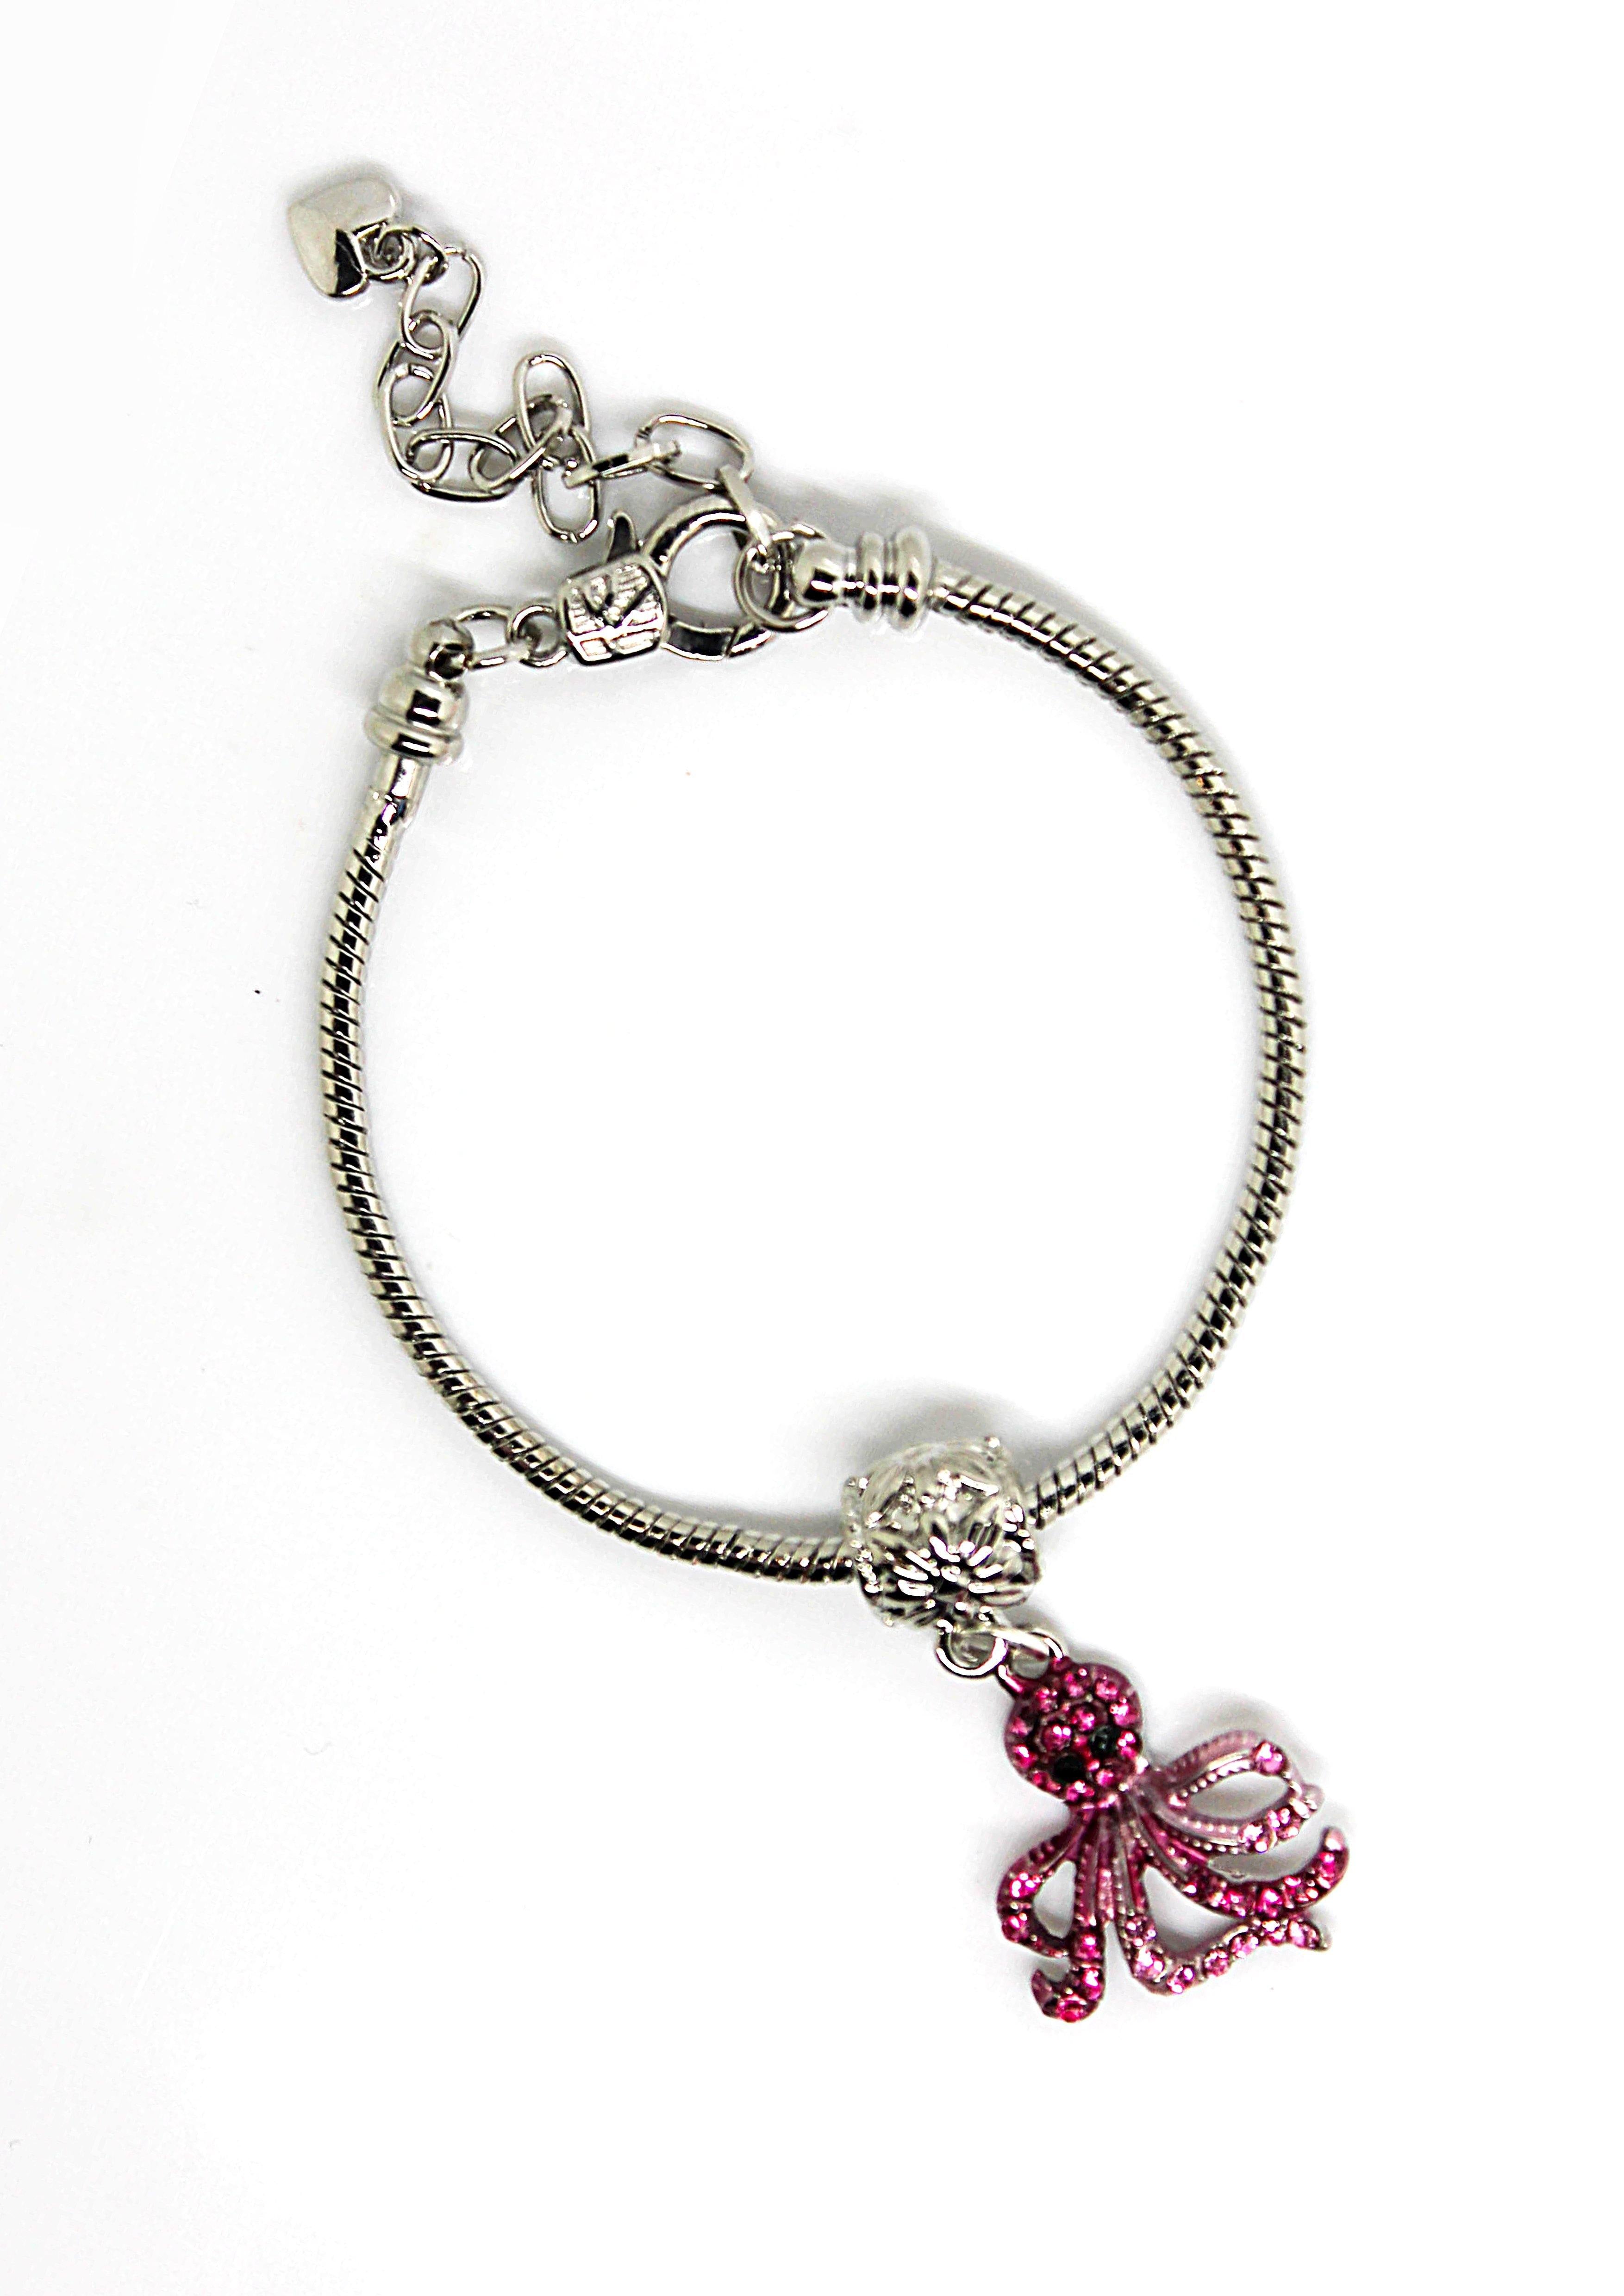 Octopus Pink Charm Bracelet - Wildtouch - Wildtouch